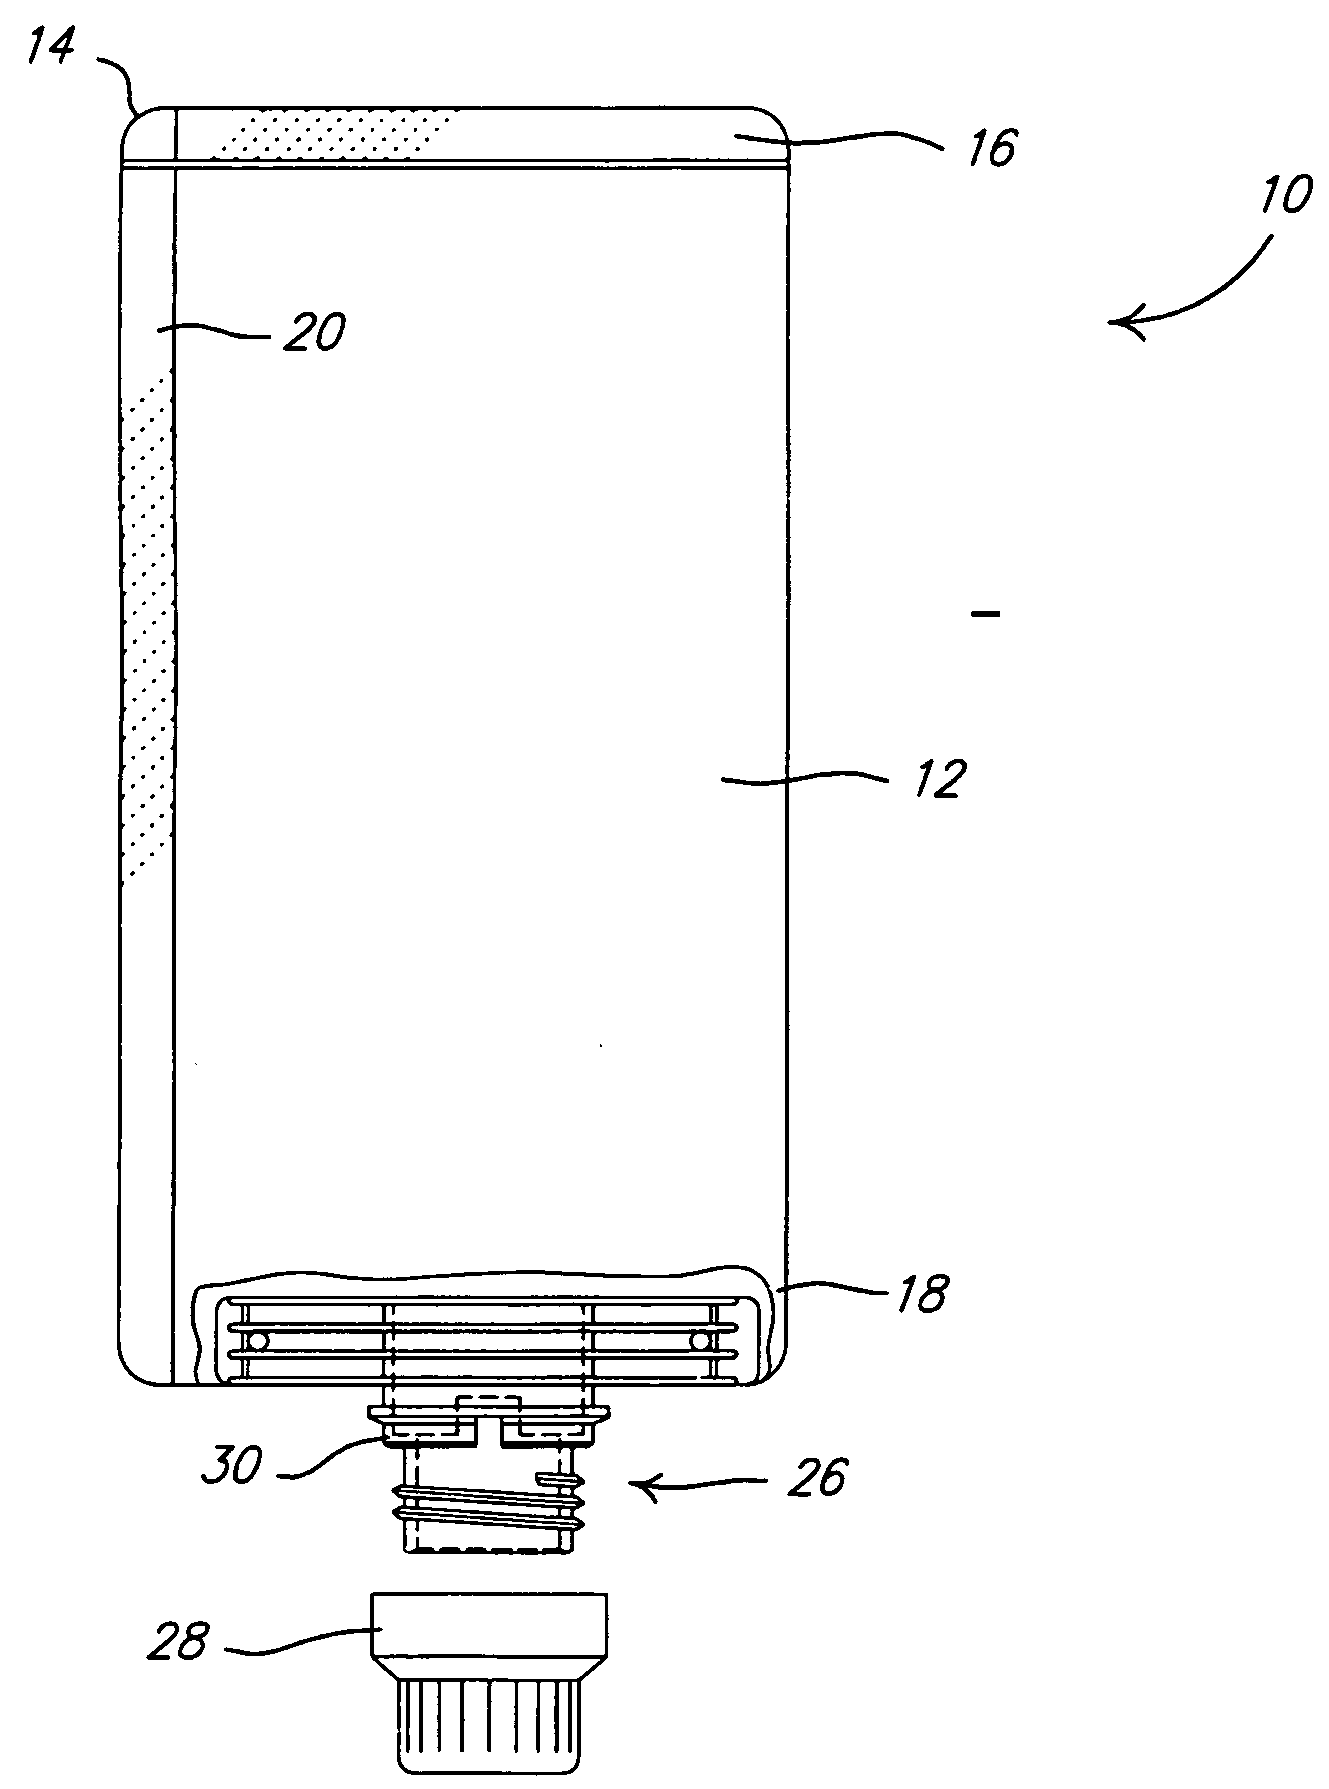 Apparatus and method of filling a flexible pouch with extended shelf life